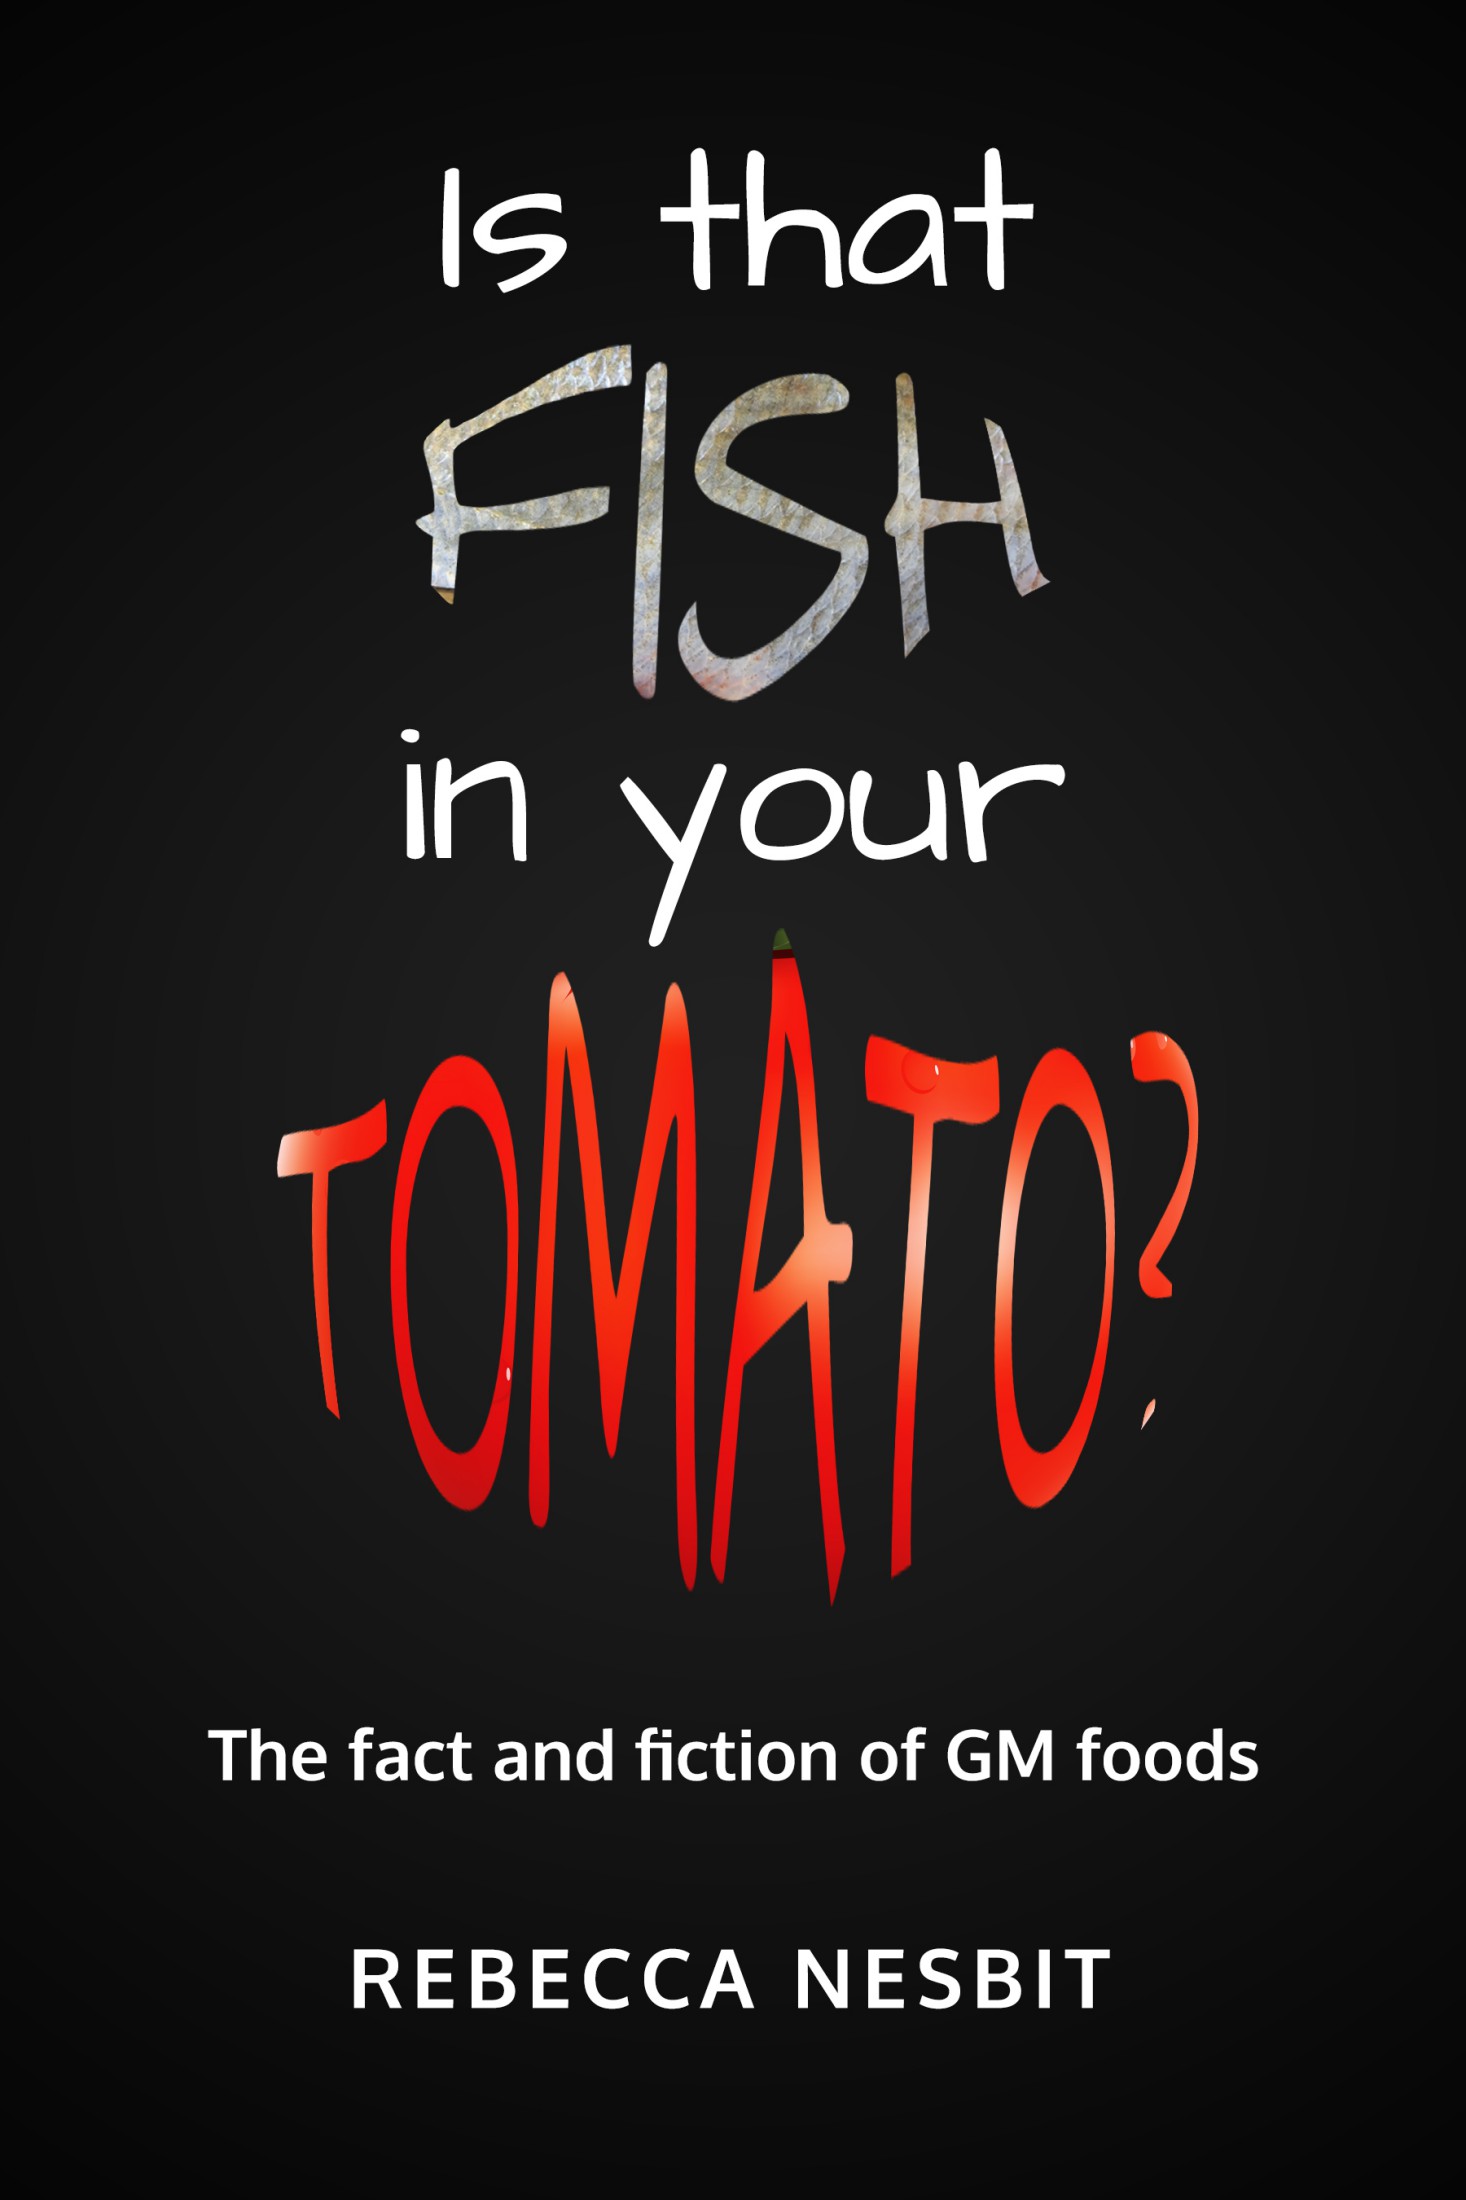 Is that Fish in your Tomato? by Rebecca Nesbit